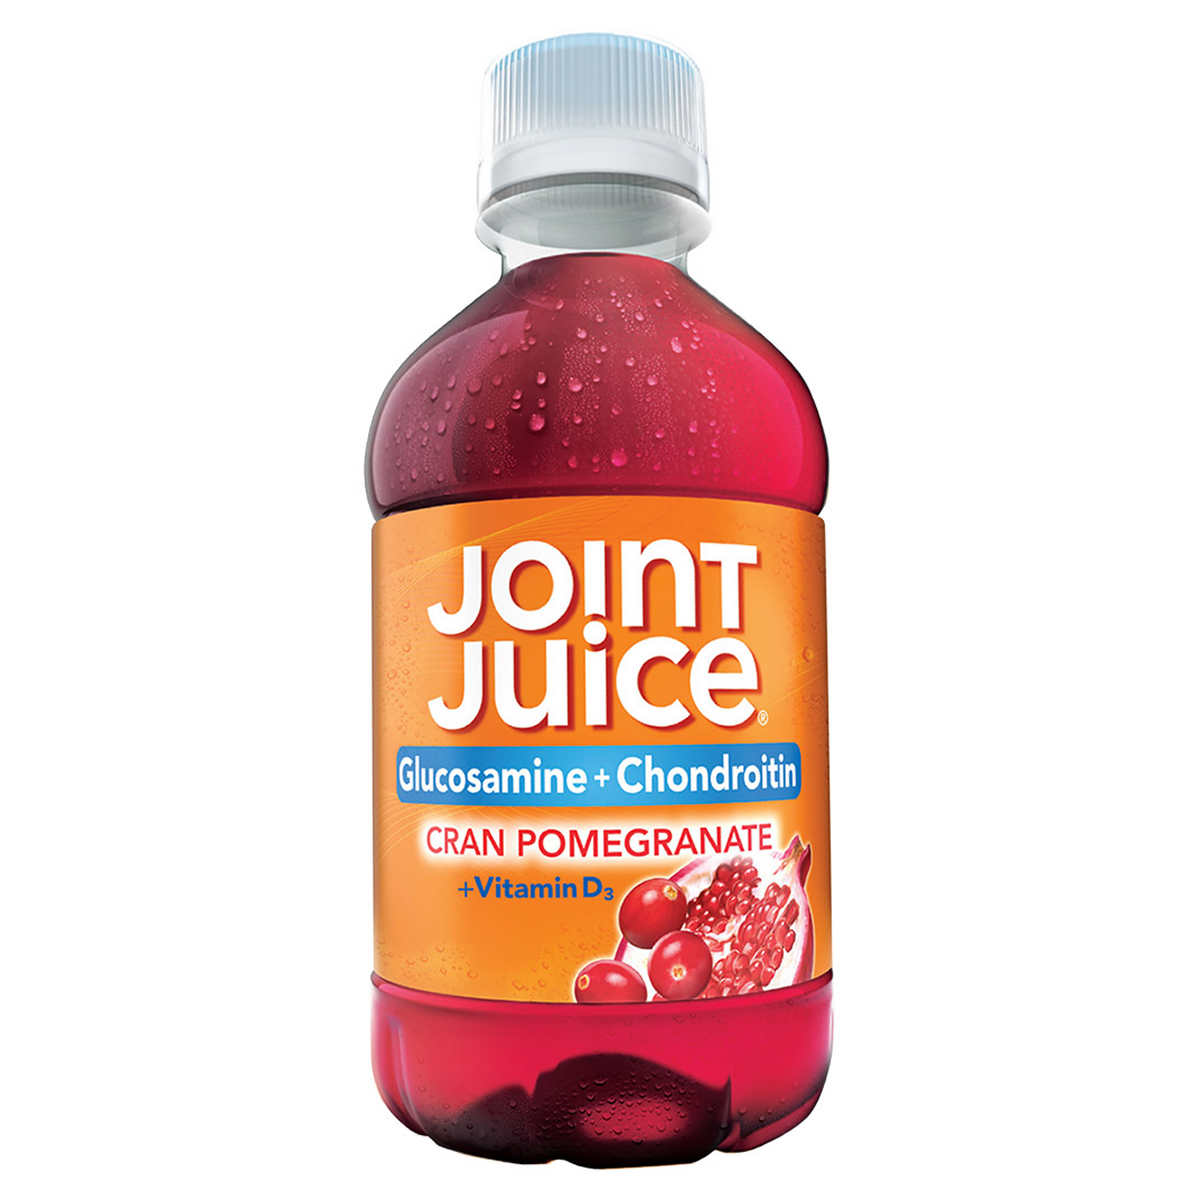 joint-juice-reviews-2022-update-should-you-consider-buying-it